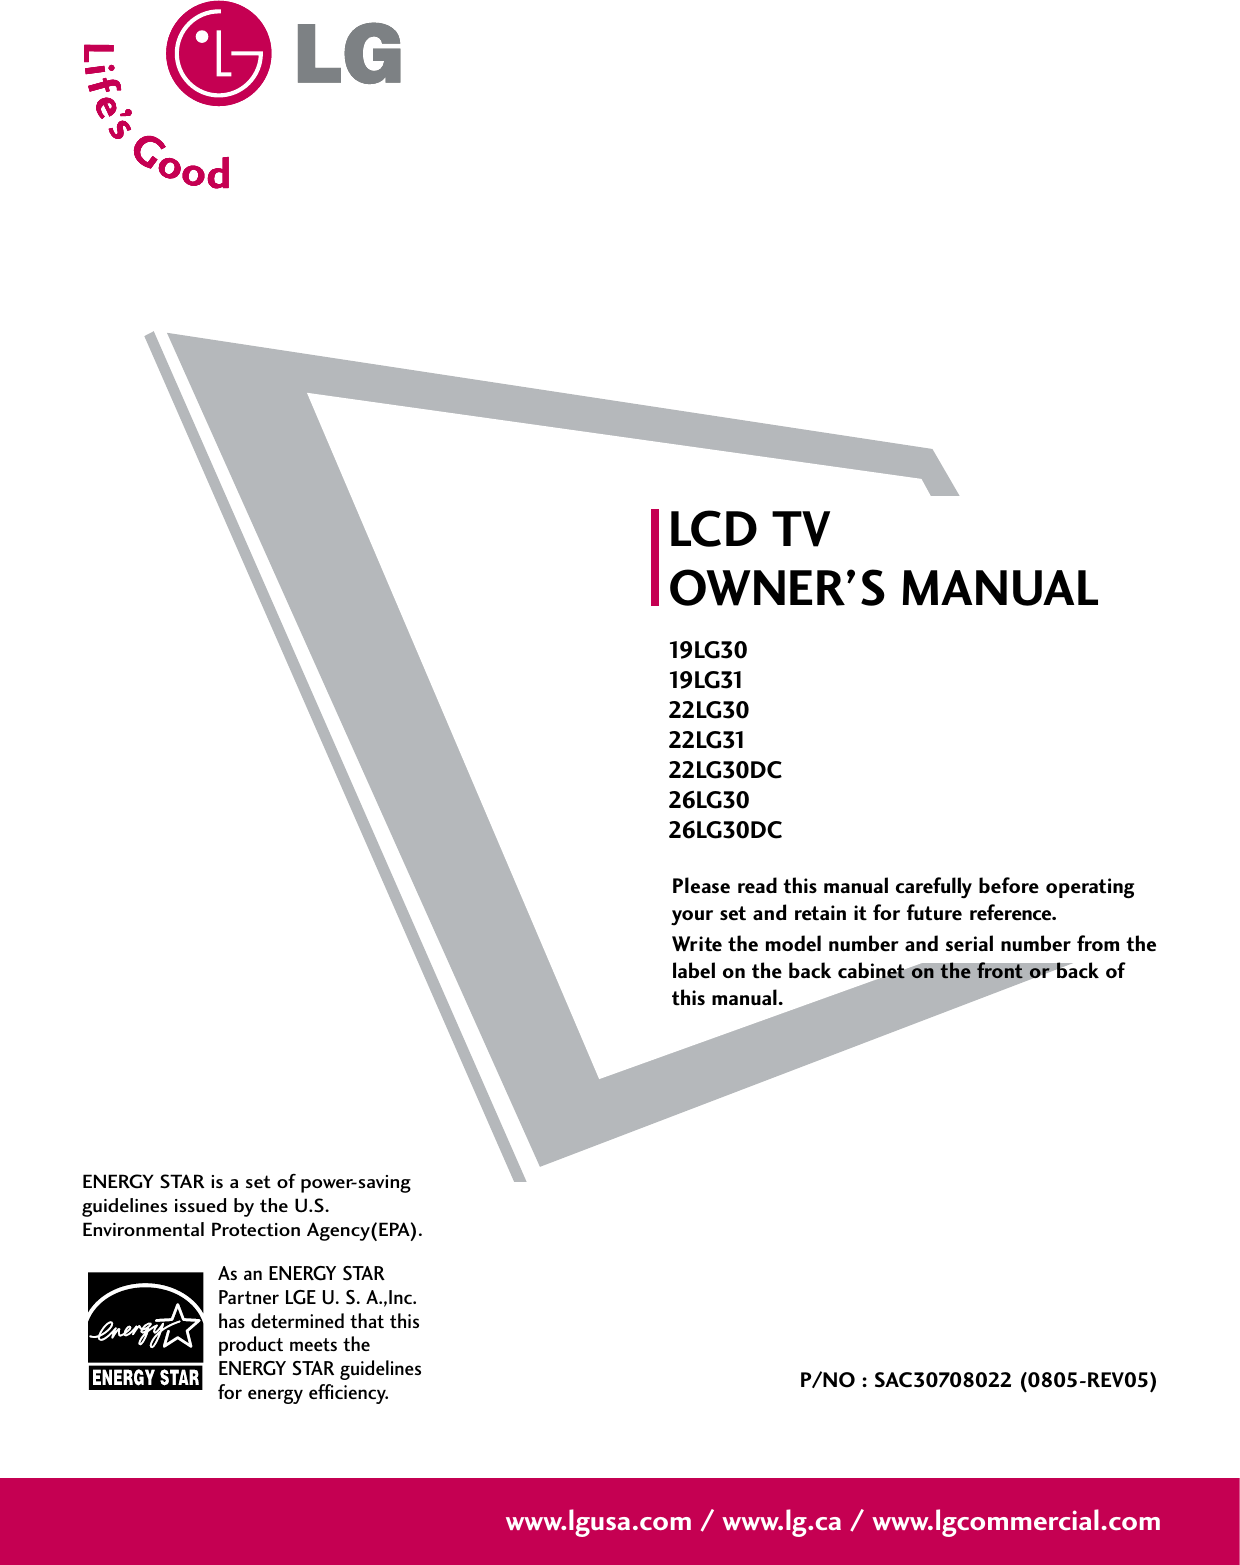 Please read this manual carefully before operatingyour set and retain it for future reference.Write the model number and serial number from thelabel on the back cabinet on the front or back ofthis manual. LCD TVOWNER’S MANUAL19 LG 3019 LG 3122LG3022LG3122LG30DC26LG3026LG30DCP/NO : SAC30708022 (0805-REV05)www.lgusa.com / www.lg.ca / www.lgcommercial.comAs an ENERGY STARPartner LGE U. S. A.,Inc.has determined that thisproduct meets theENERGY STAR guidelinesfor energy efficiency.ENERGY STAR is a set of power-savingguidelines issued by the U.S.Environmental Protection Agency(EPA).